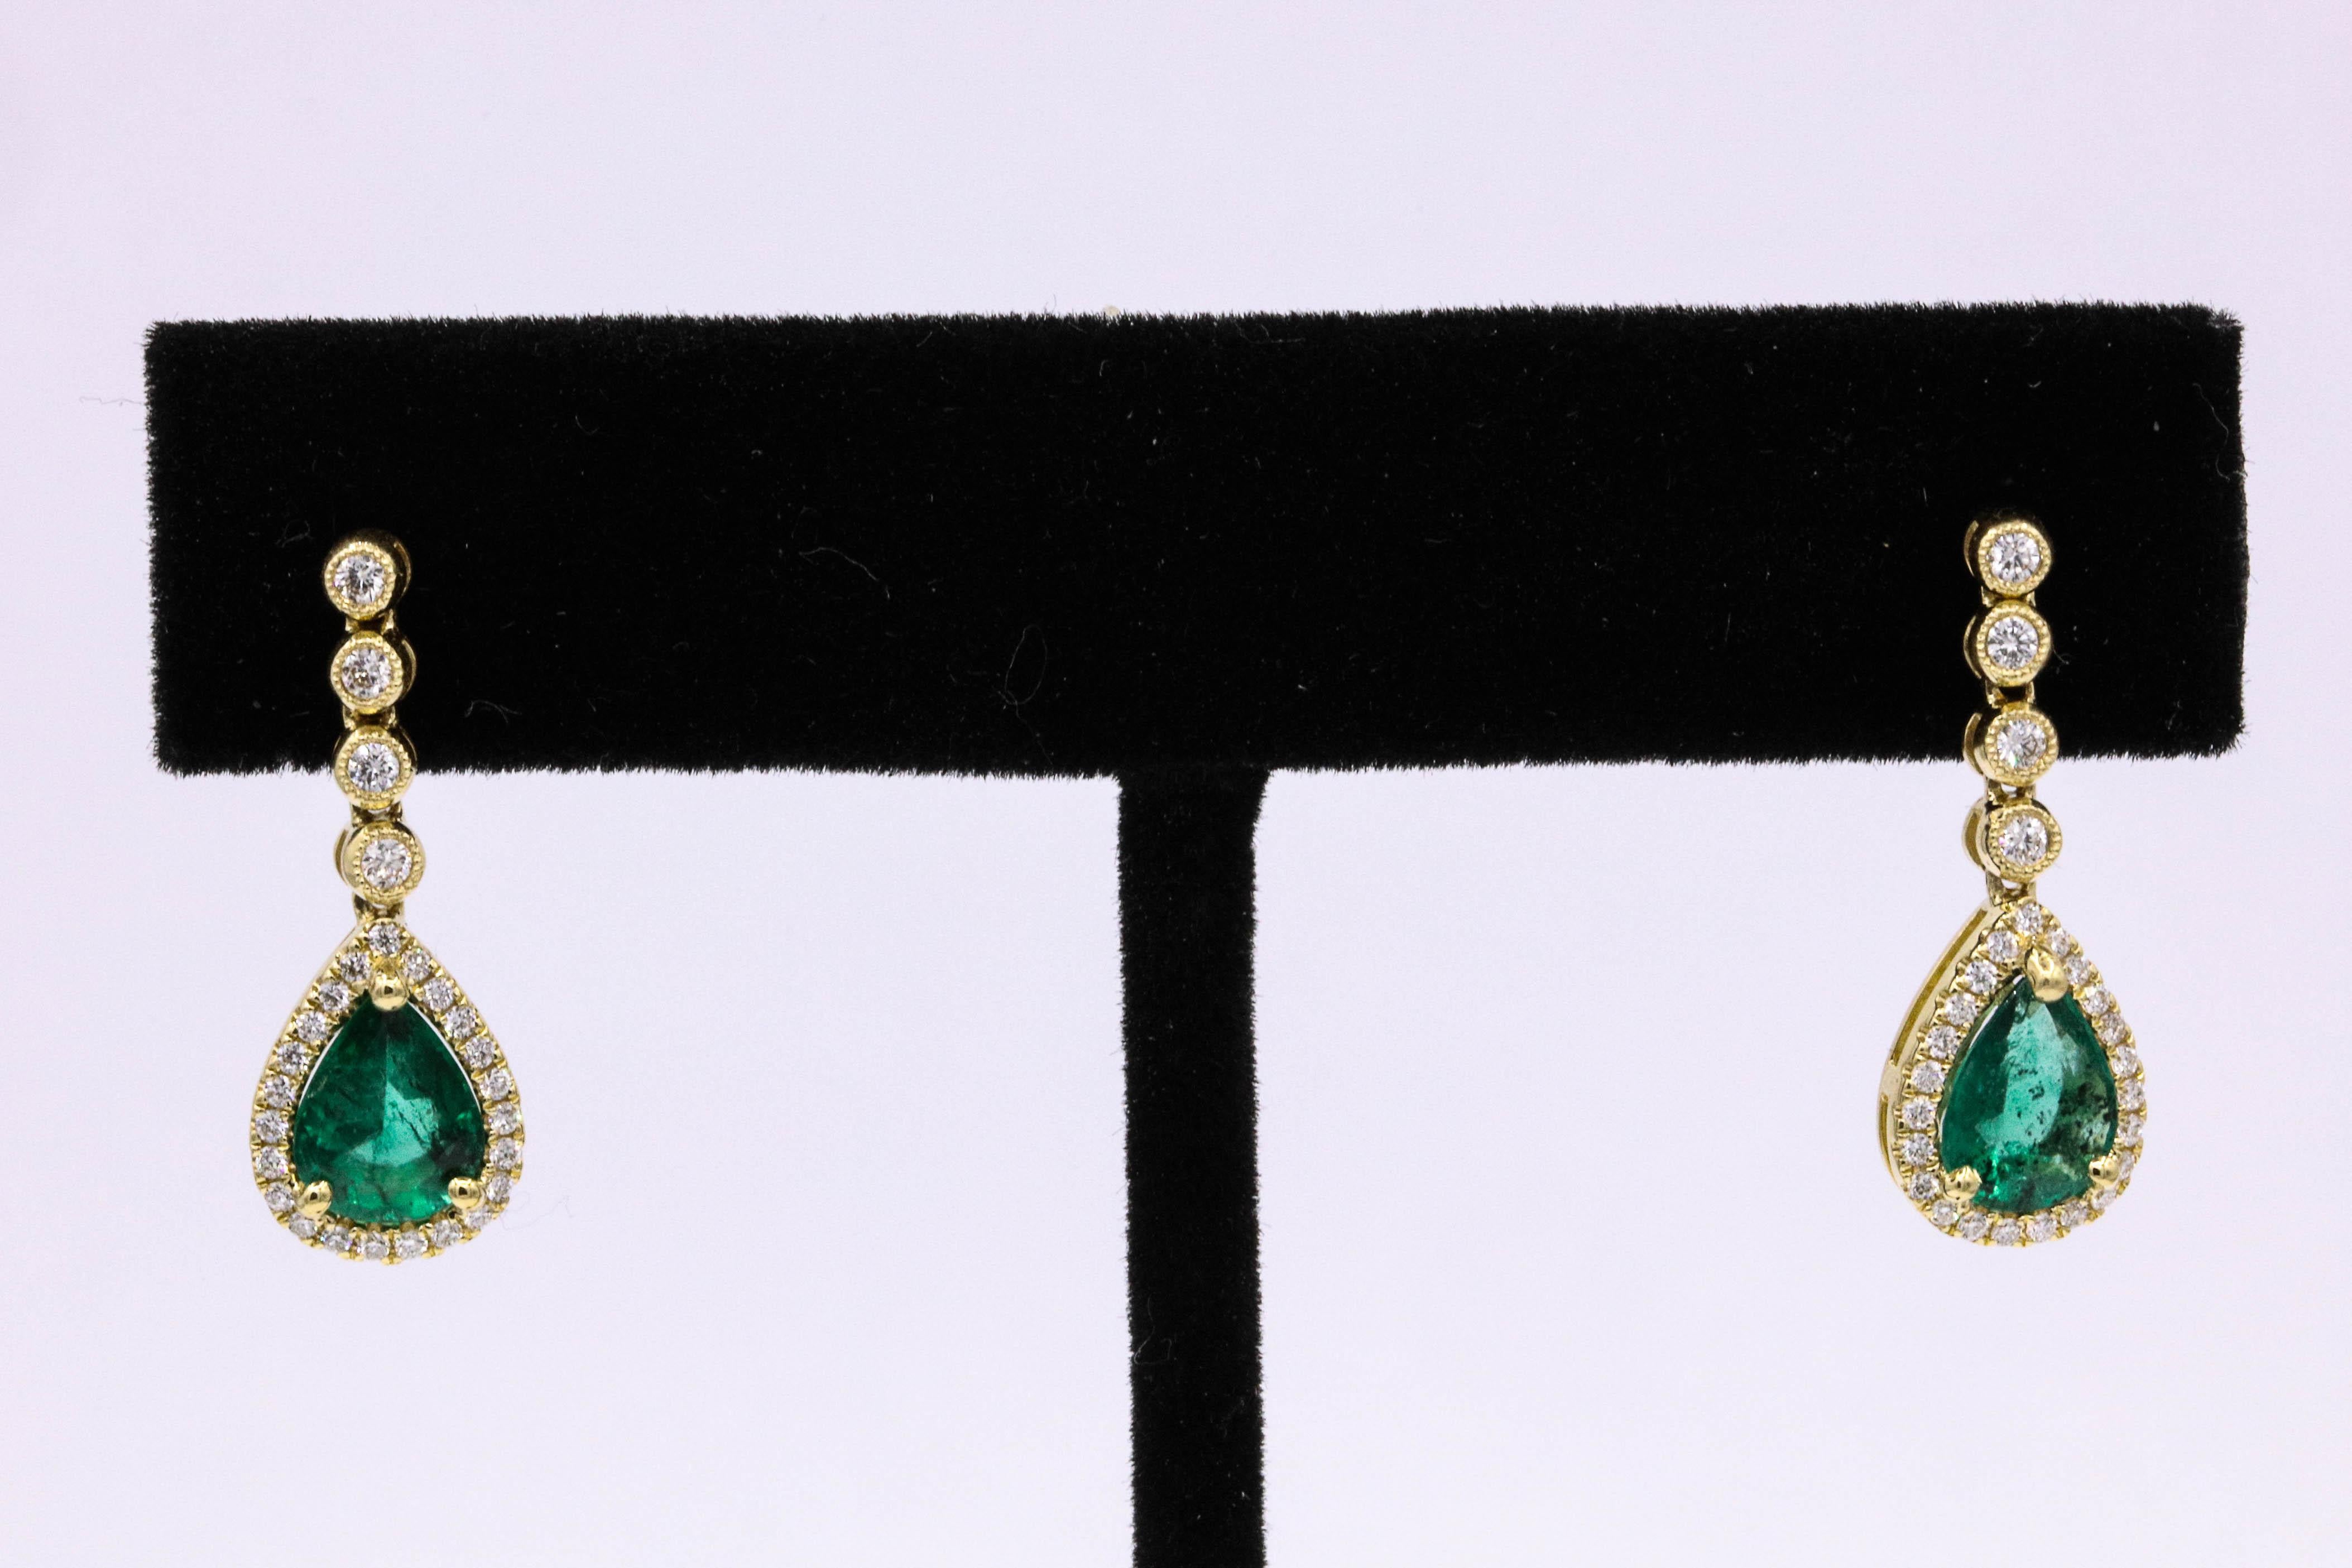 18K Yellow gold drop earrings featuring two pear shape Zambian emeralds, 1.60 carats, flanked with round brilliants weighing 0.35 carats.
Color G-H
Clarity SI